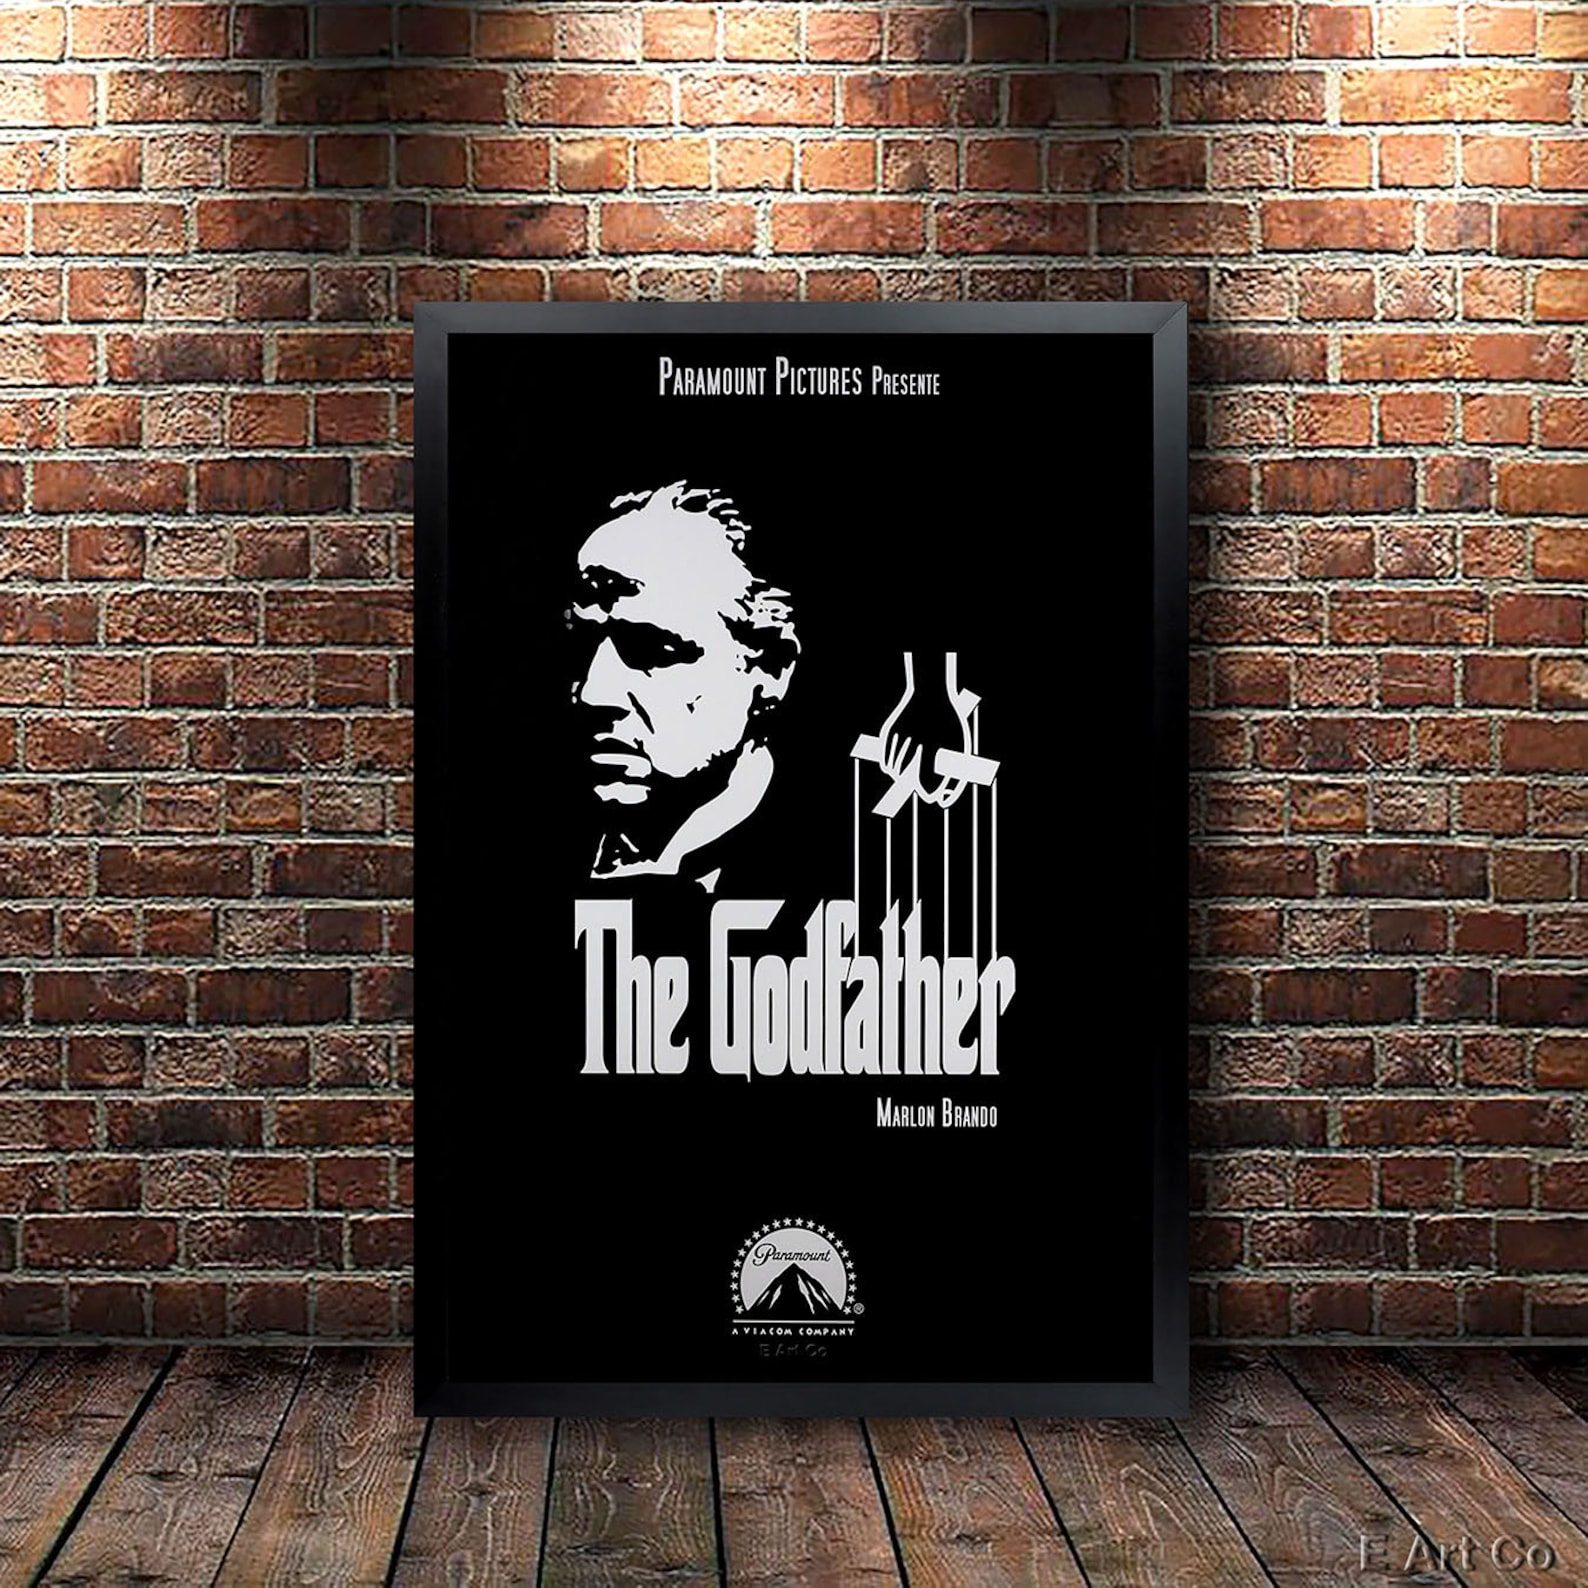 The Godfather Movie Poster Framed and Ready to Hang. - Etsy